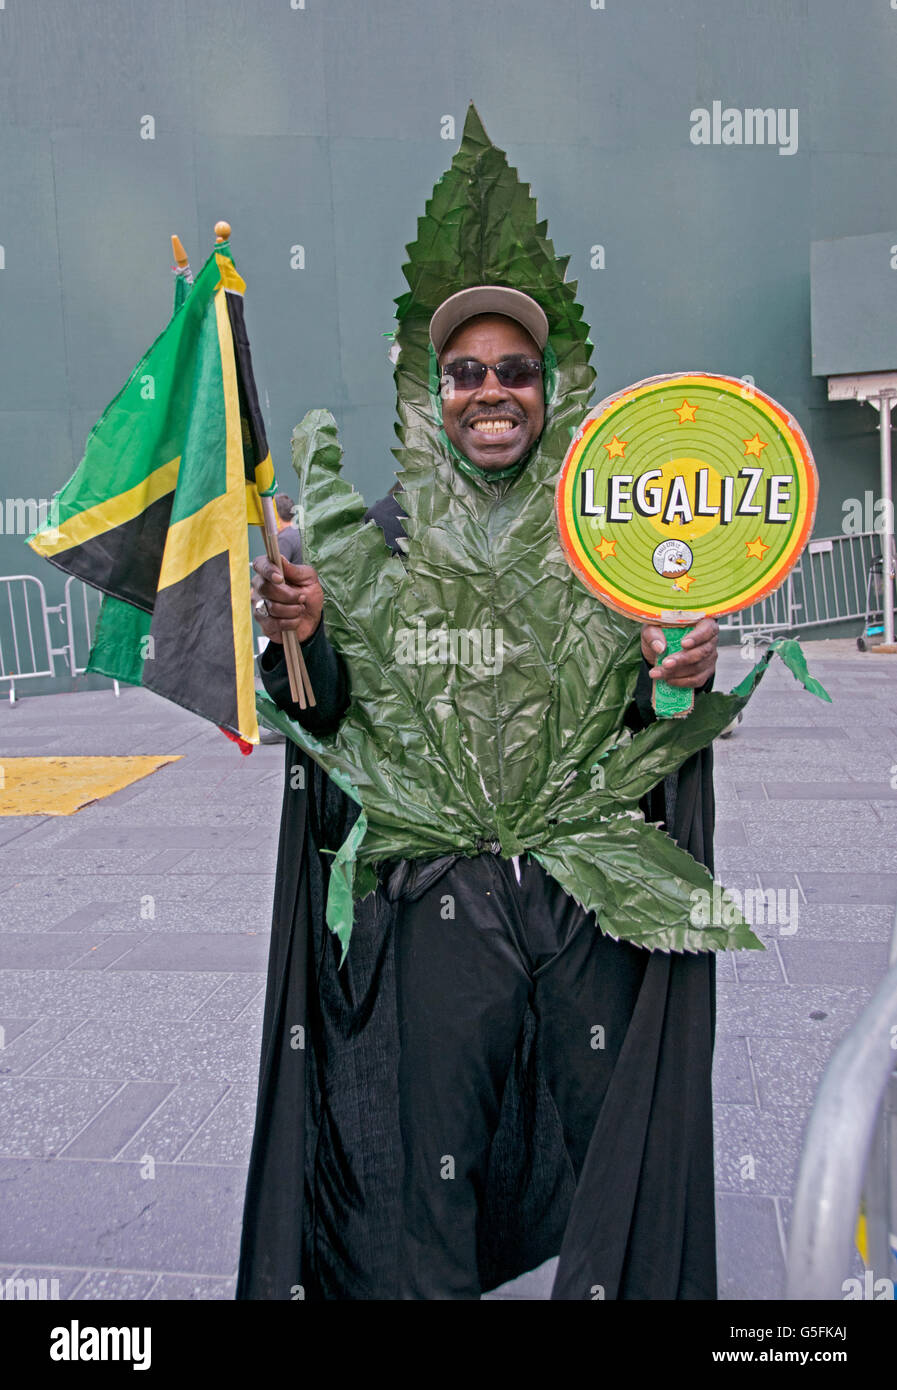 A man in Times Square dressed as a marijuana leaf holding Jamaican flags and a legalize pot sign. In New York City. Stock Photo